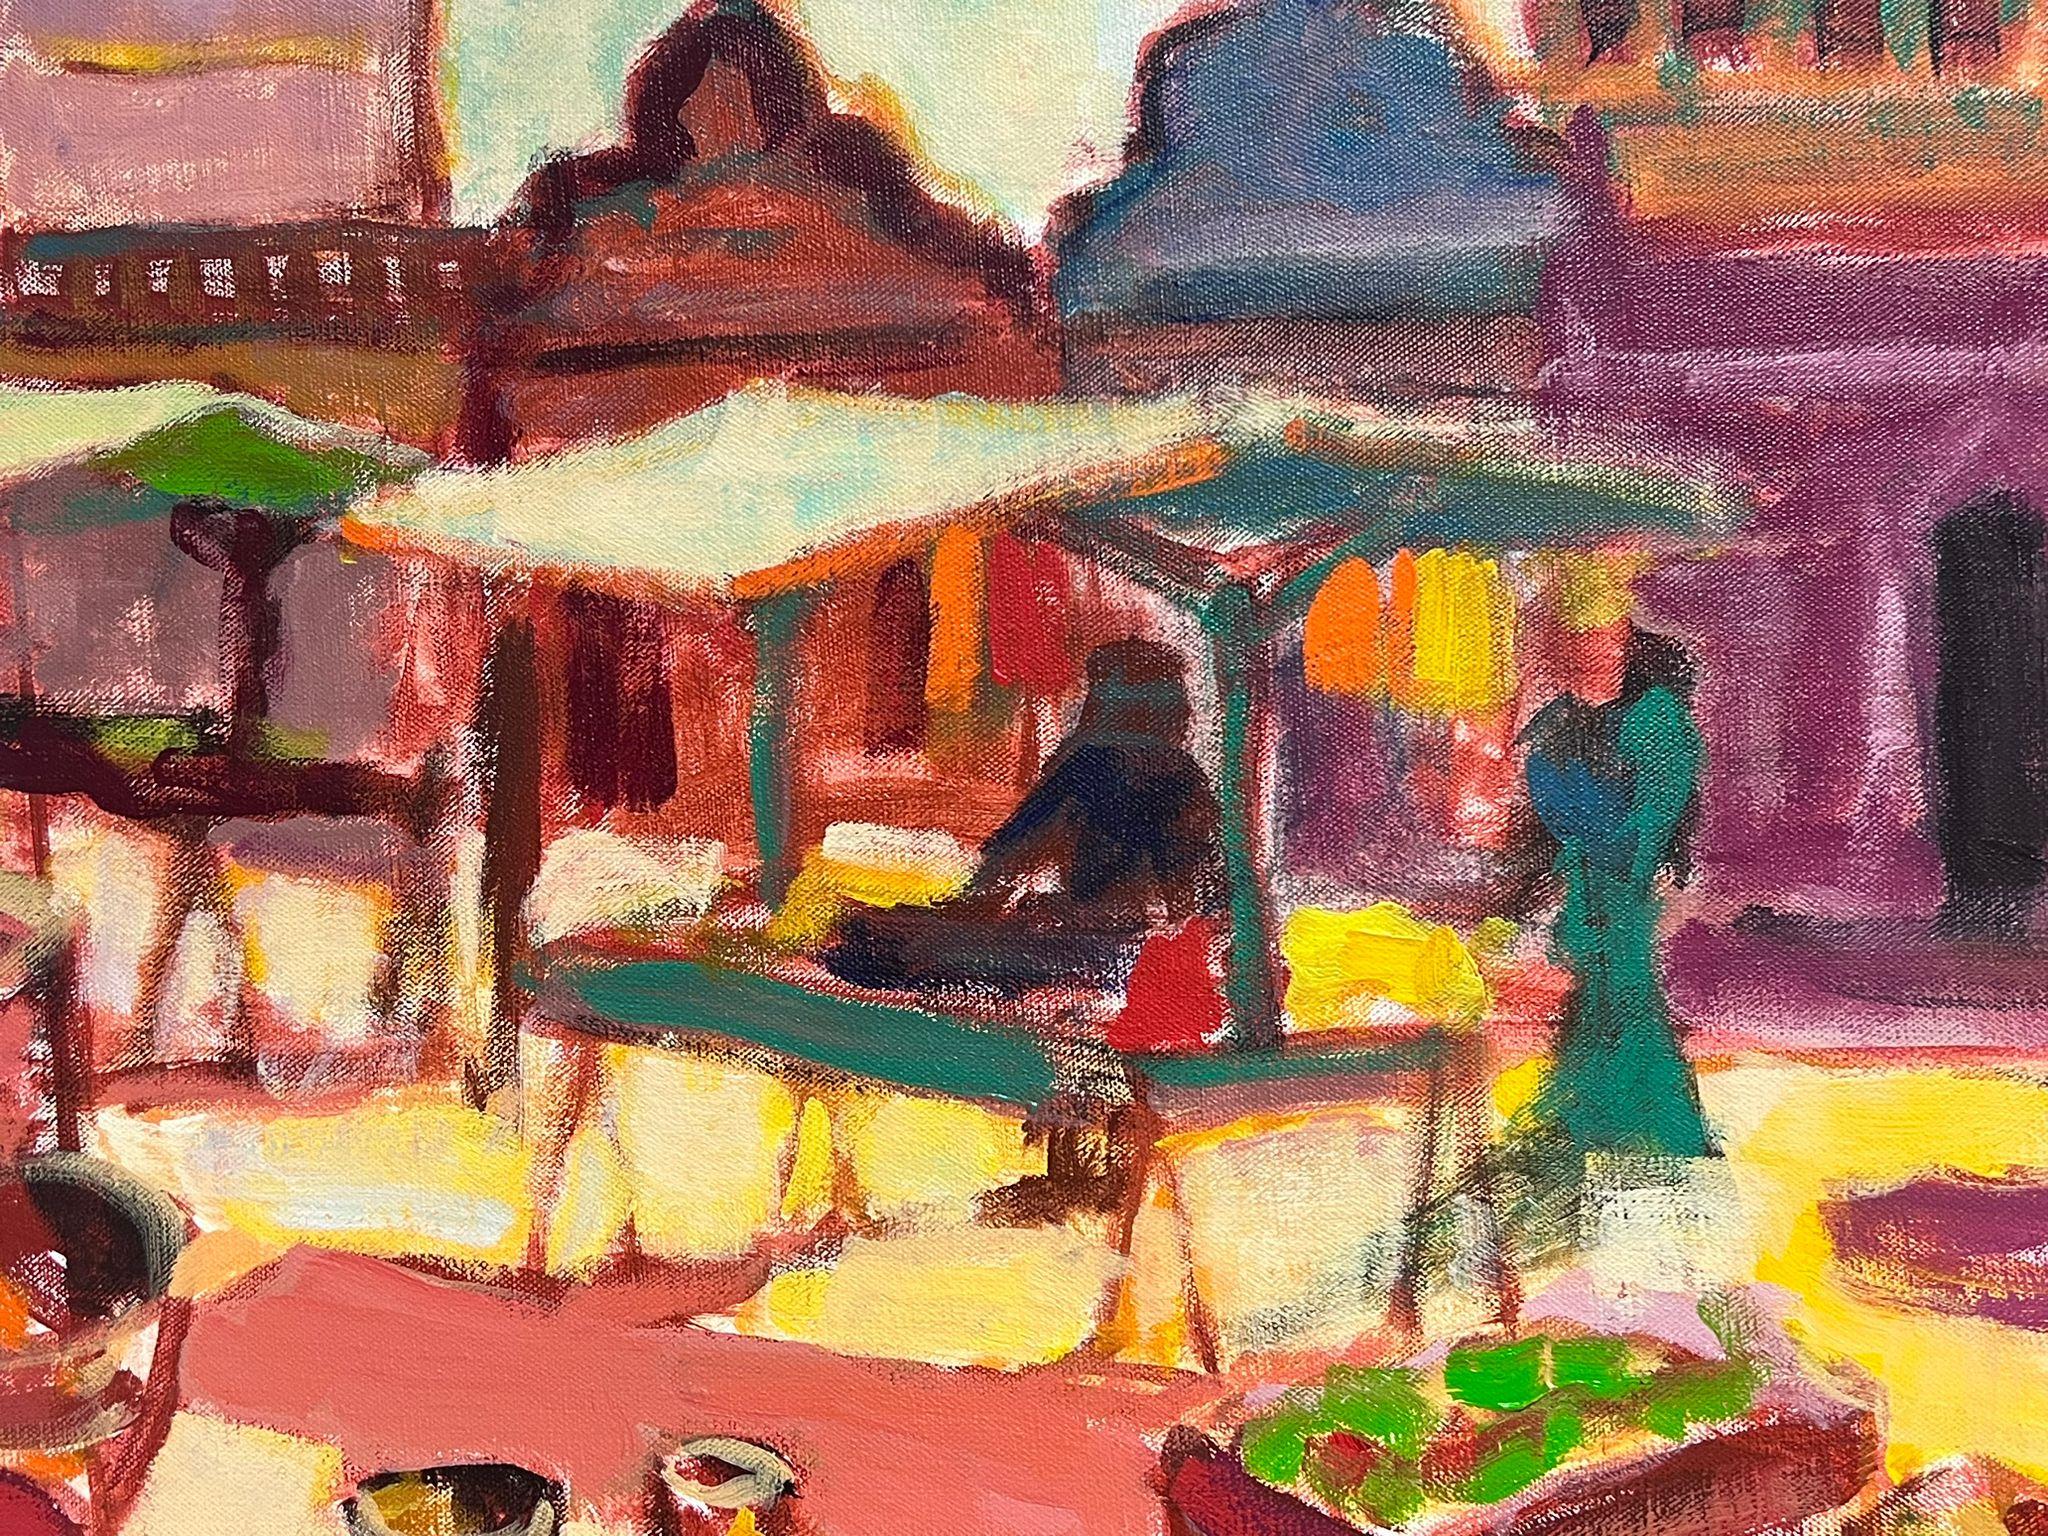 The French Market
by Michel Kritz (French 1925-1994) 
oil on canvas, unframed
canvas: 24 x 32 inches
provenance: private collection, France
condition: very good and sound condition  